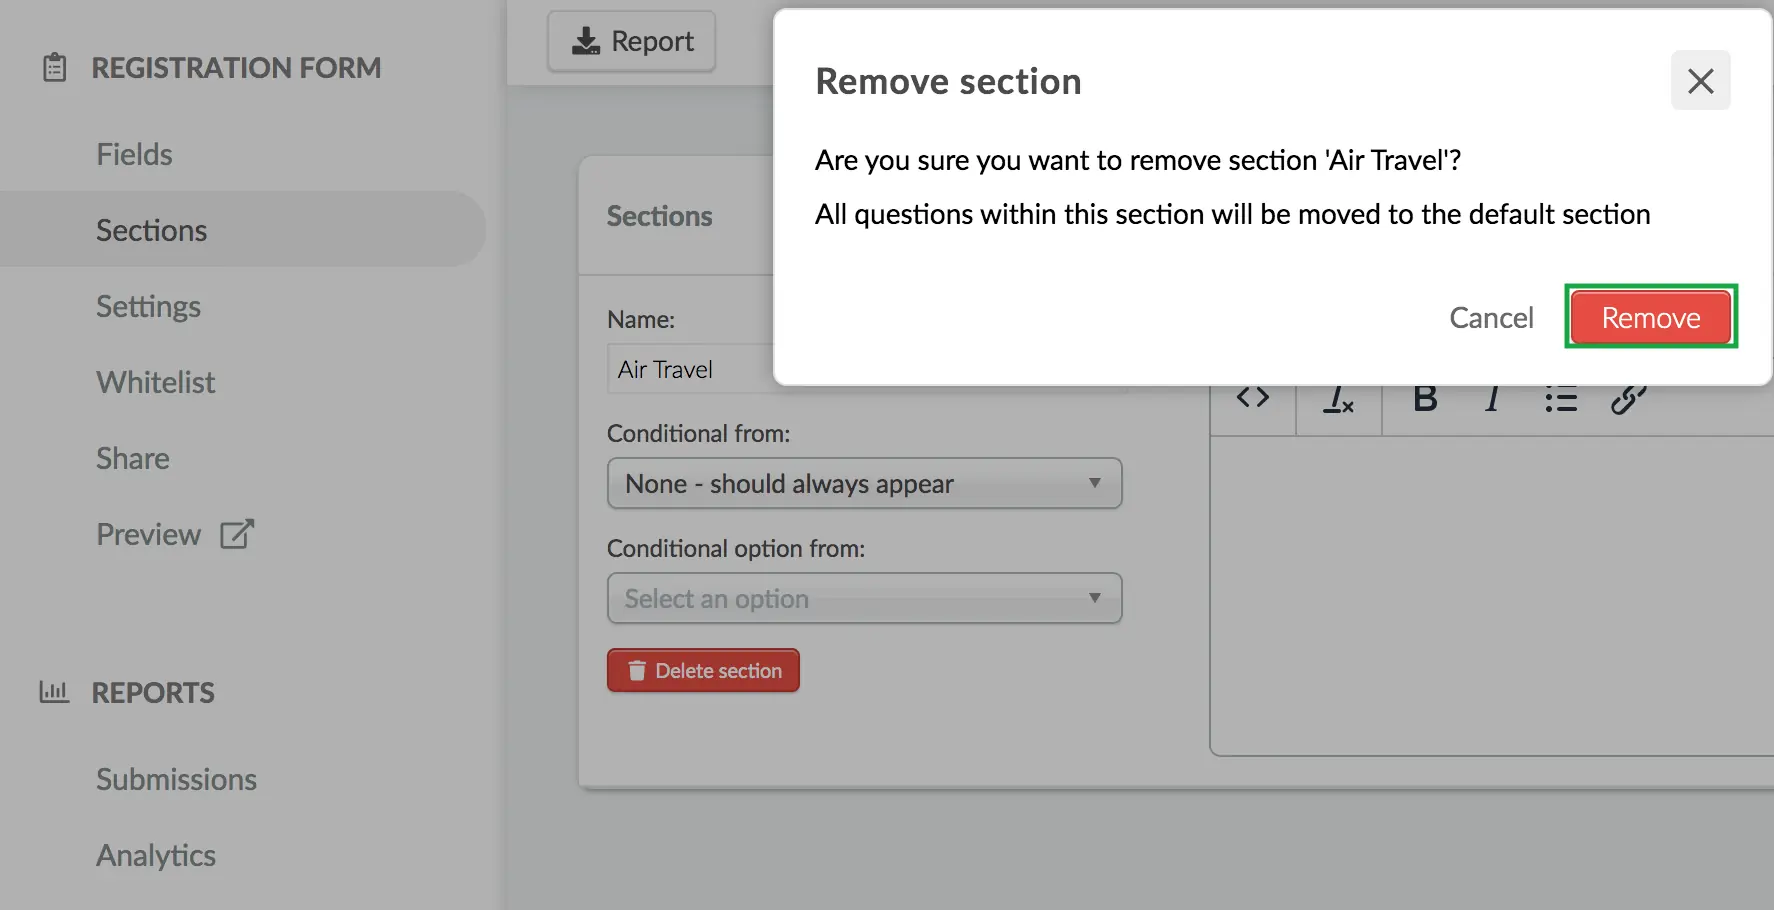 Clicking remove to finalize deletion of the section